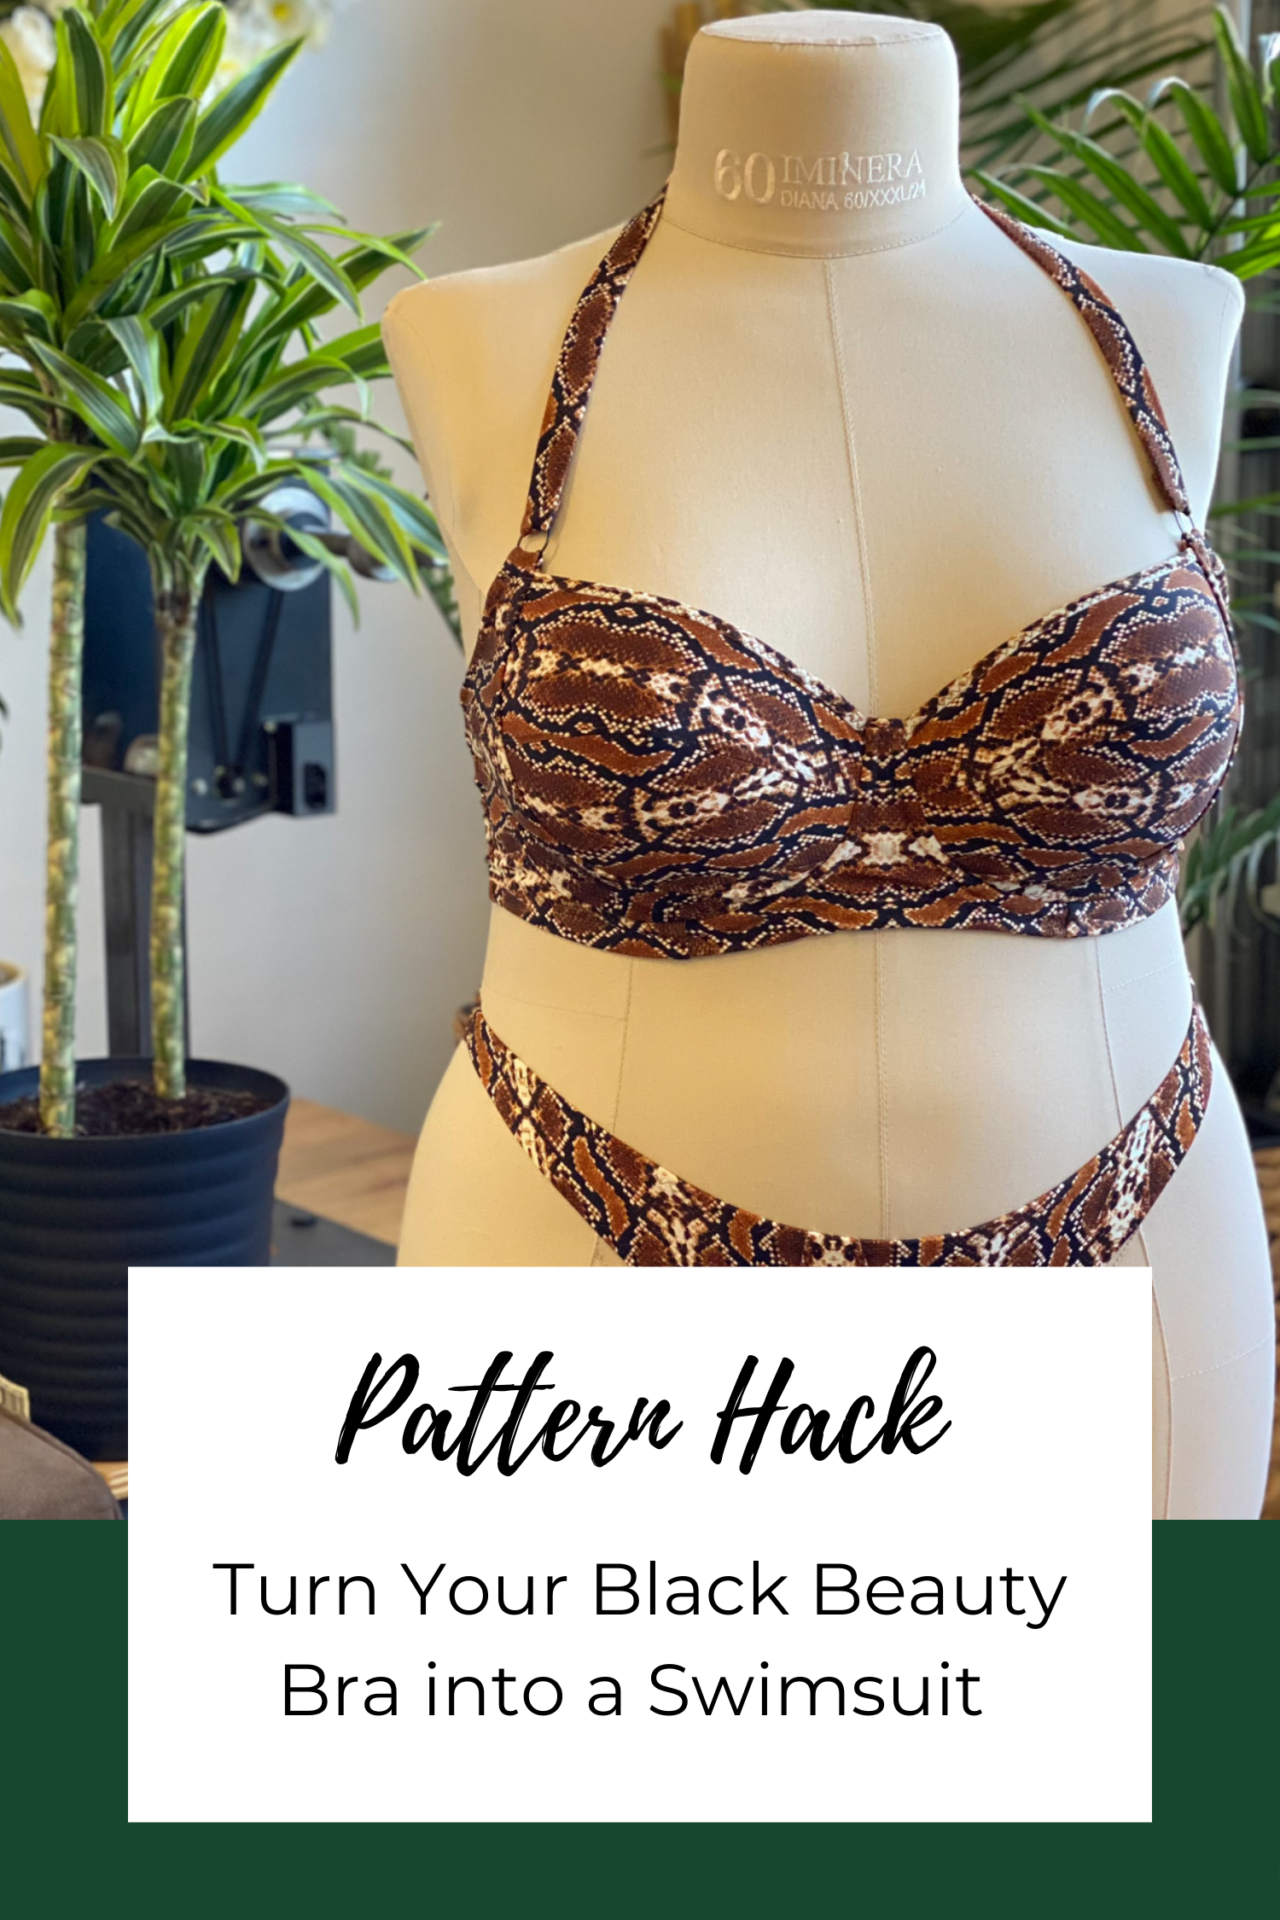 How to Make the Black Beauty Bra into a Swimsuit | Pattern Hack